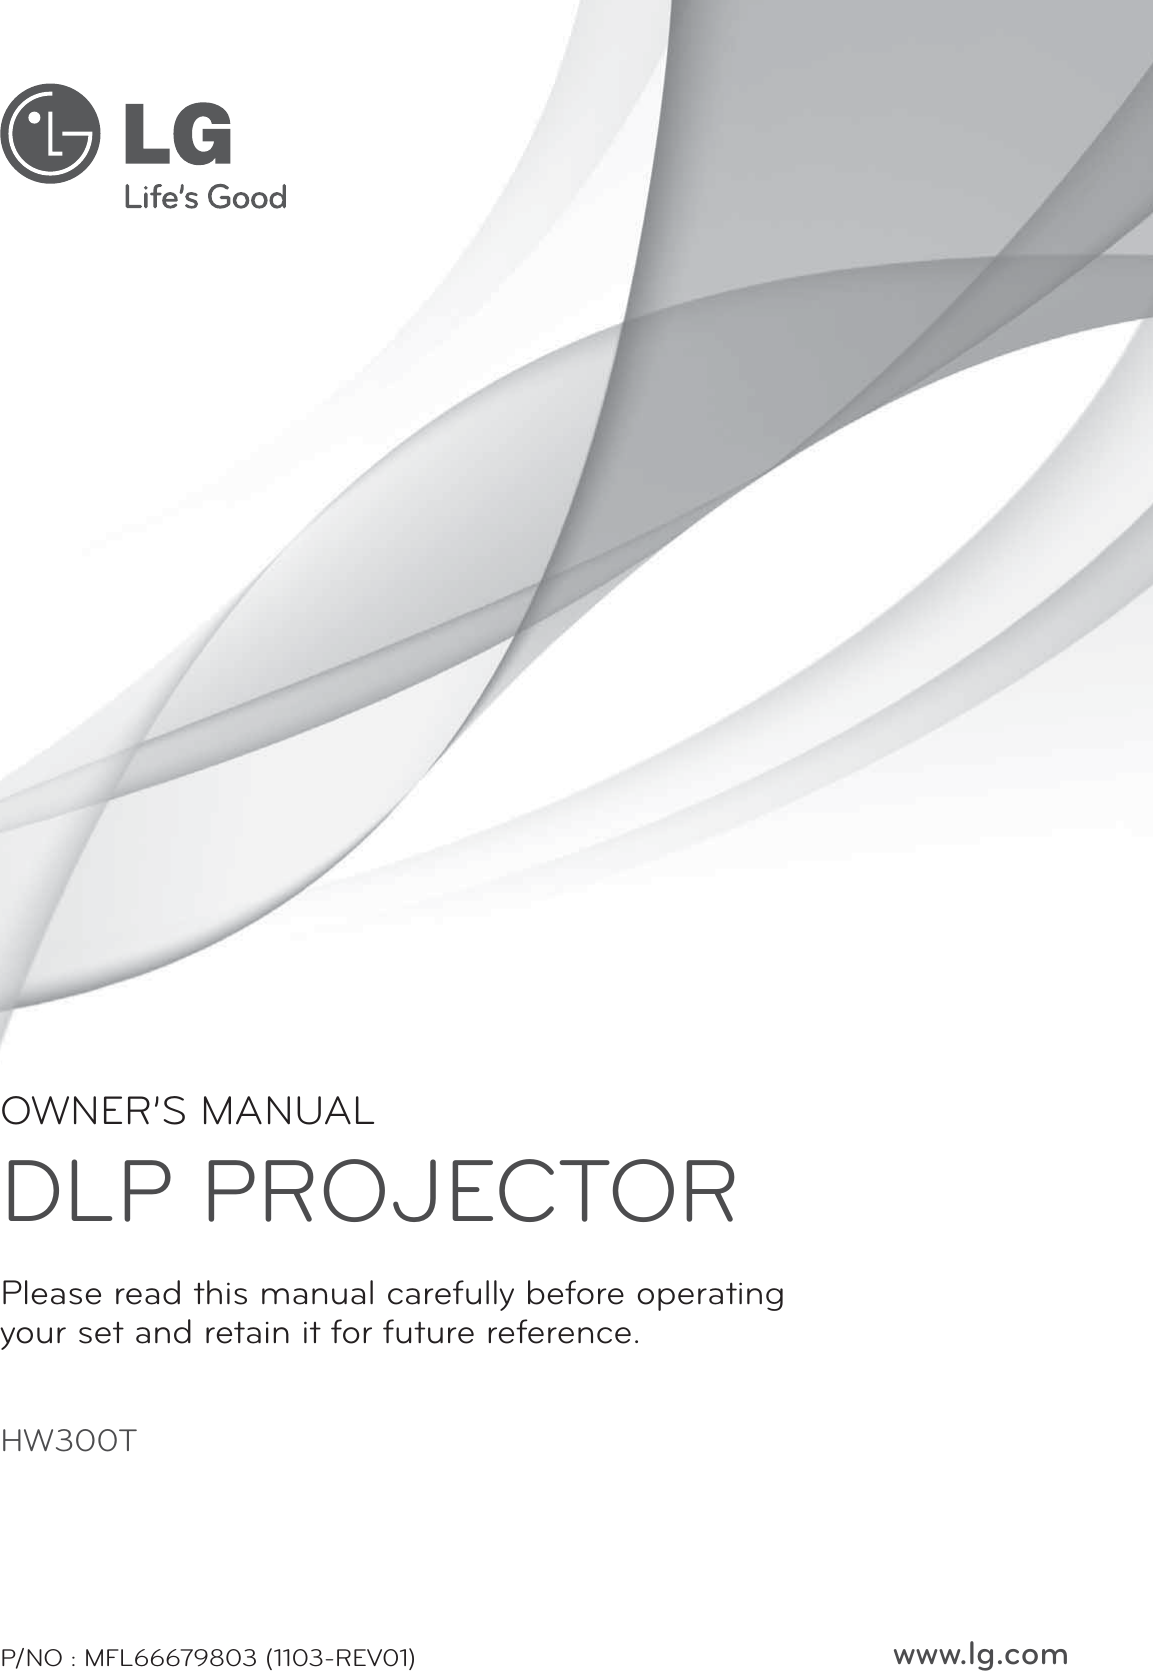 OWNER’S MANUALDLP PROJECTORHW300TPlease read this manual carefully before operatingyour set and retain it for future reference.www.lg.comP/NO : MFL66679803 (1103-REV01)